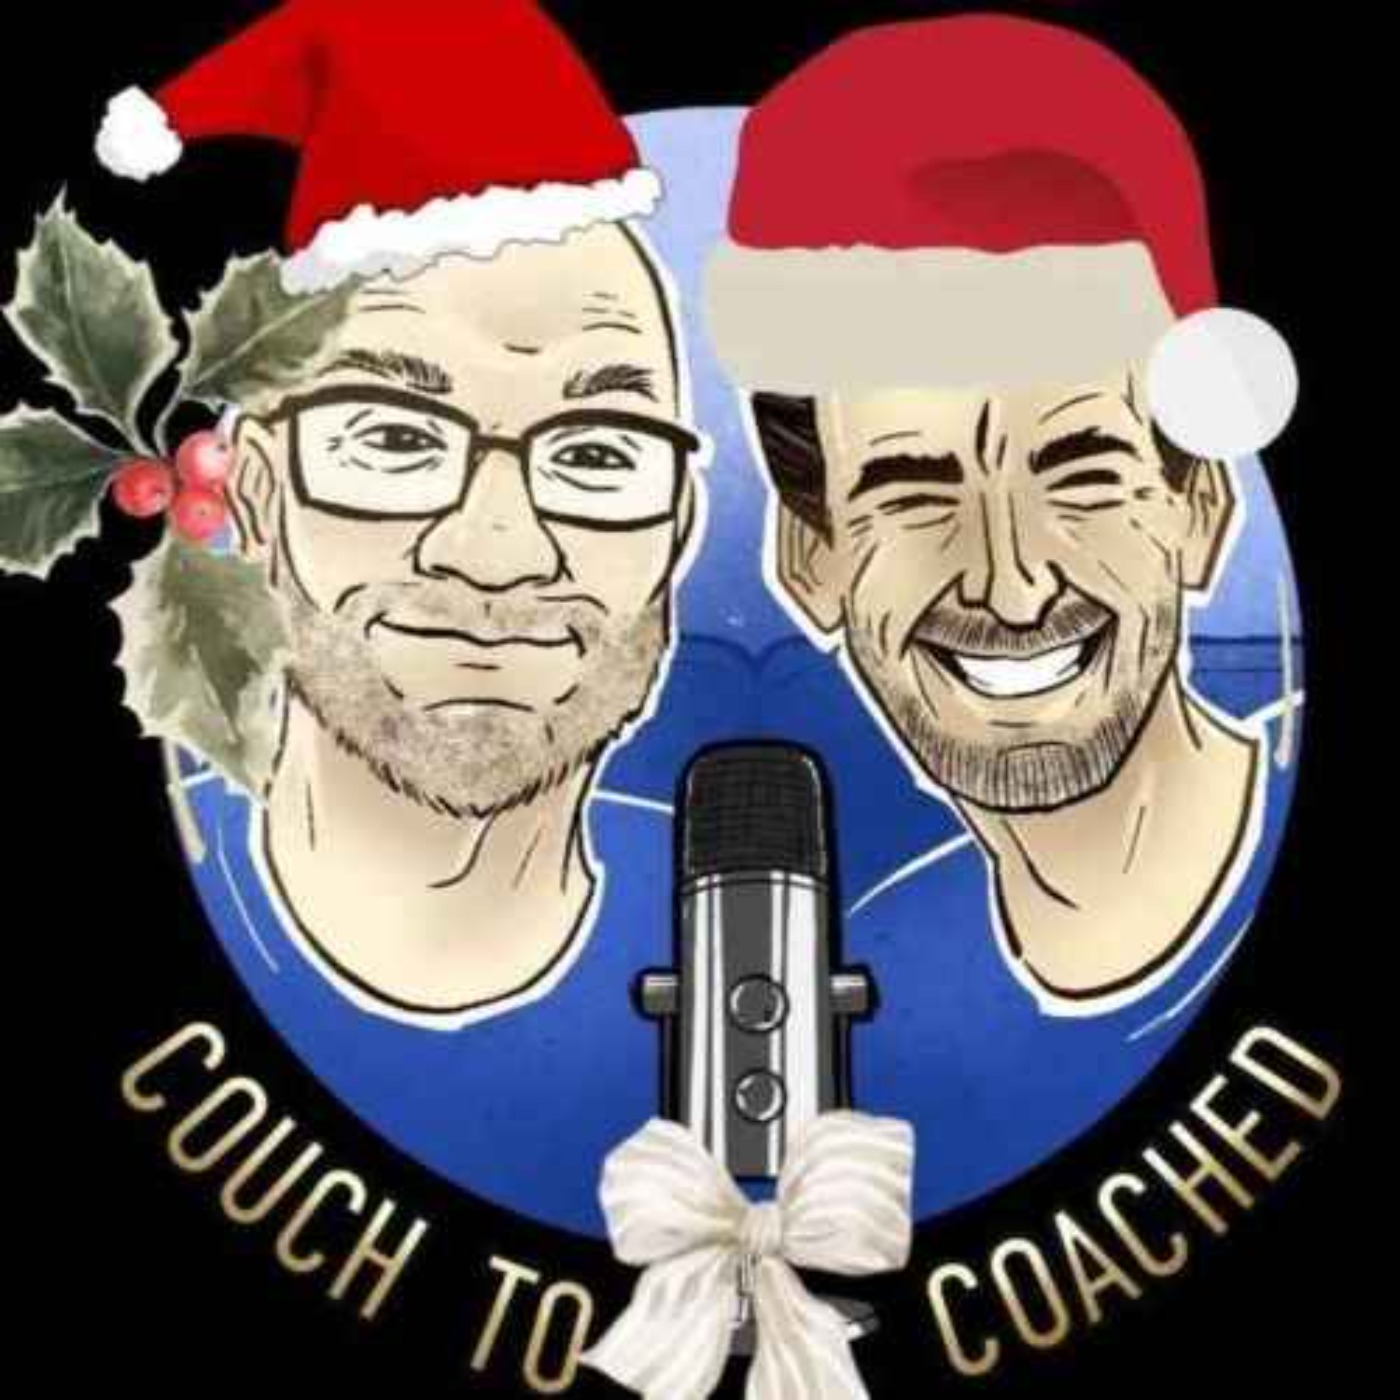 Couch to coached- Running Podcast Episode 54